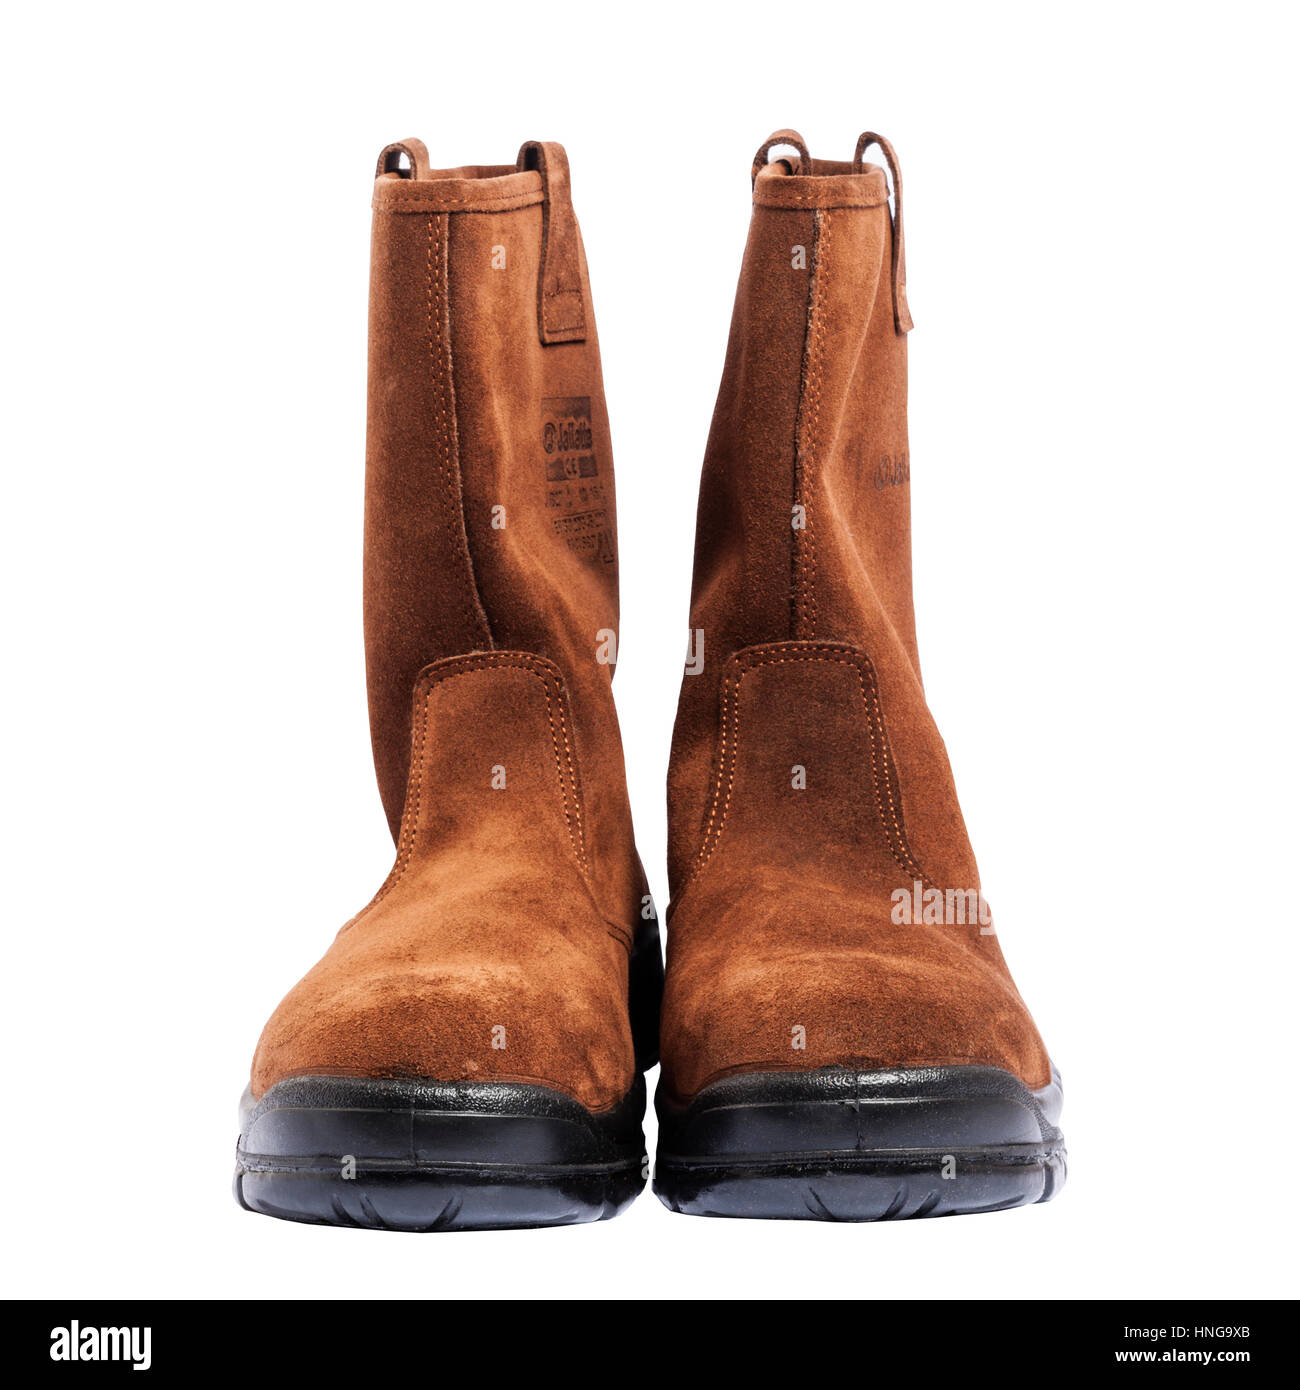 A pair of steel toe capped Jallette work rigger boots on a white background Stock Photo